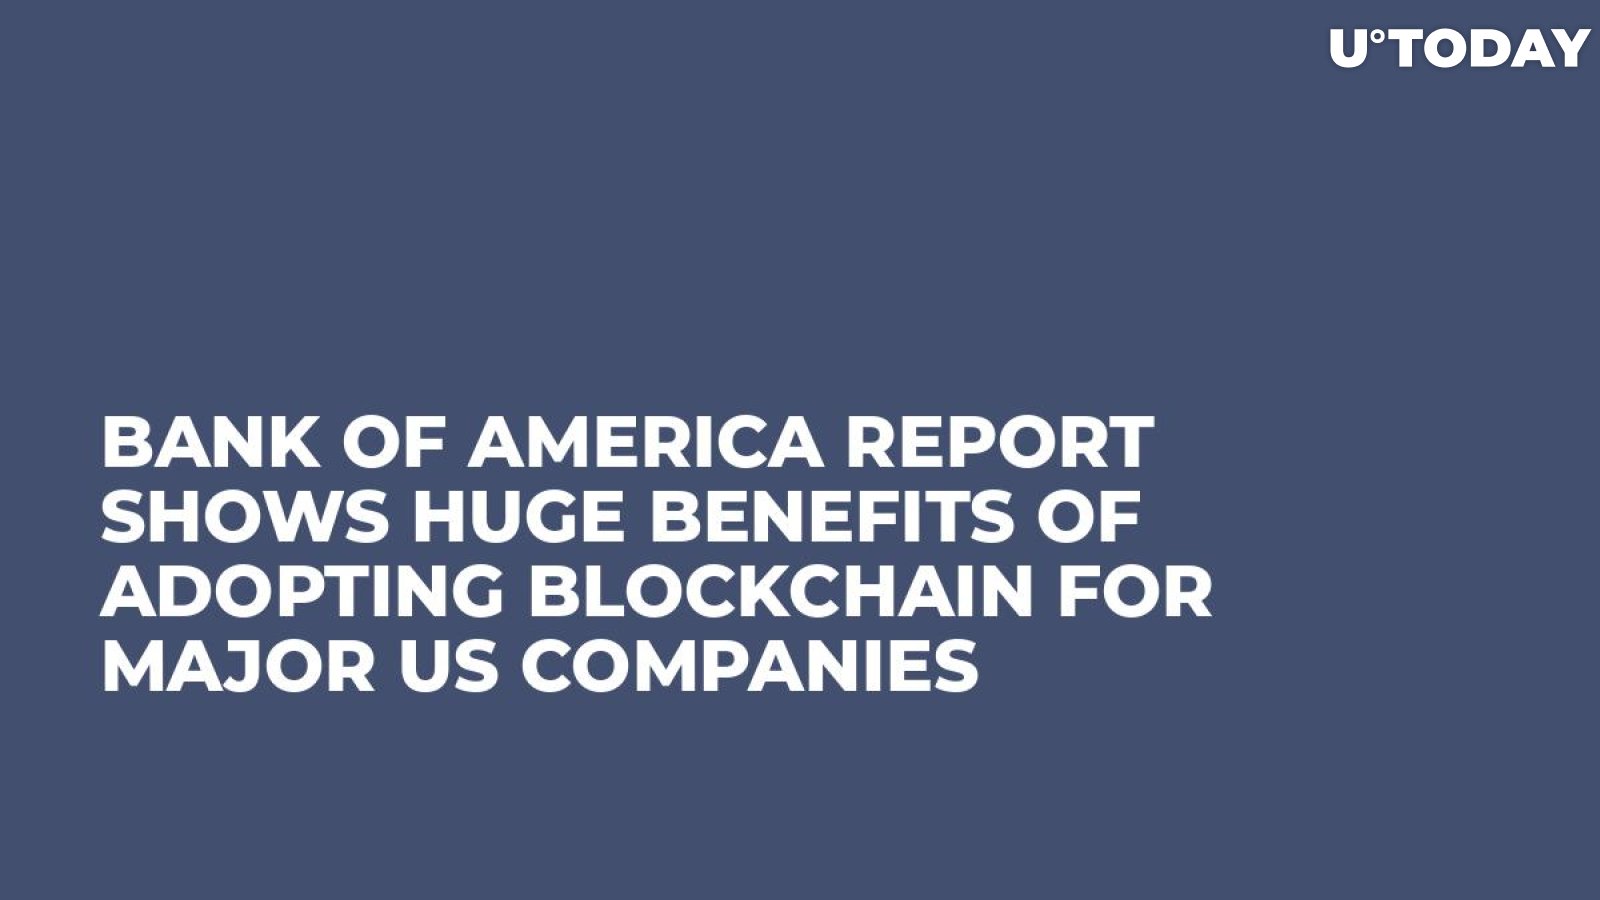 Bank of America Report Shows Huge Benefits of Adopting Blockchain For Major US Companies  